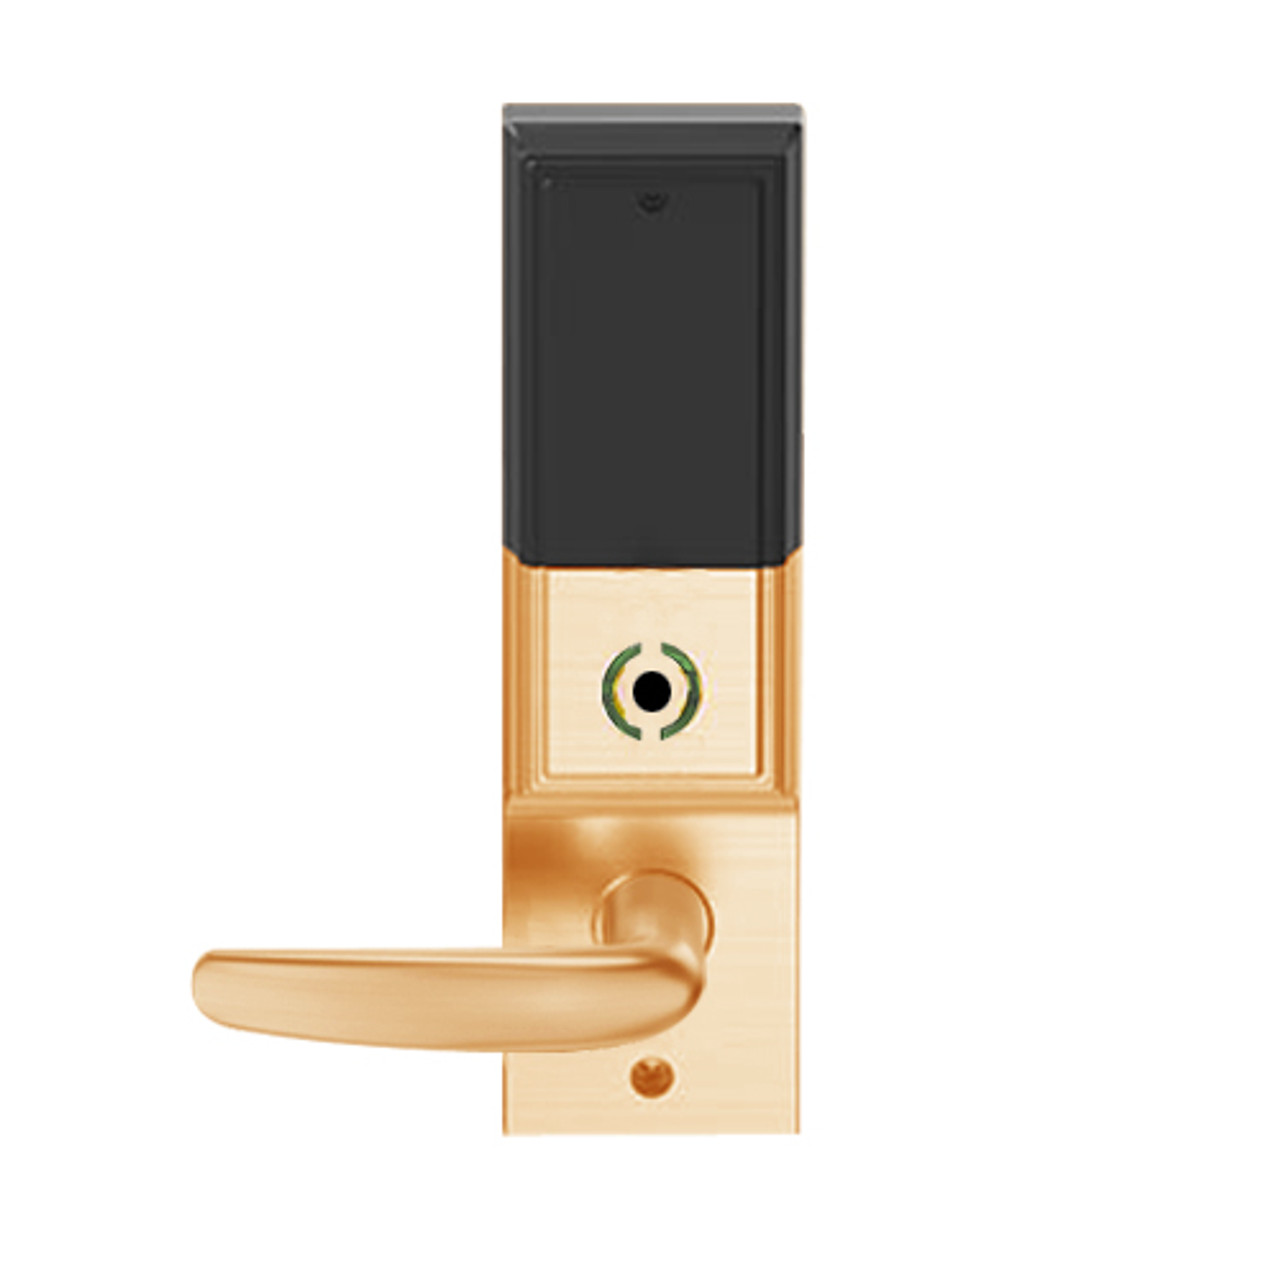 LEMB-ADD-J-07-612 Schlage Privacy/Office Wireless Addison Mortise Lock with Push Button, LED and Athens Lever Prepped for FSIC in Satin Bronze